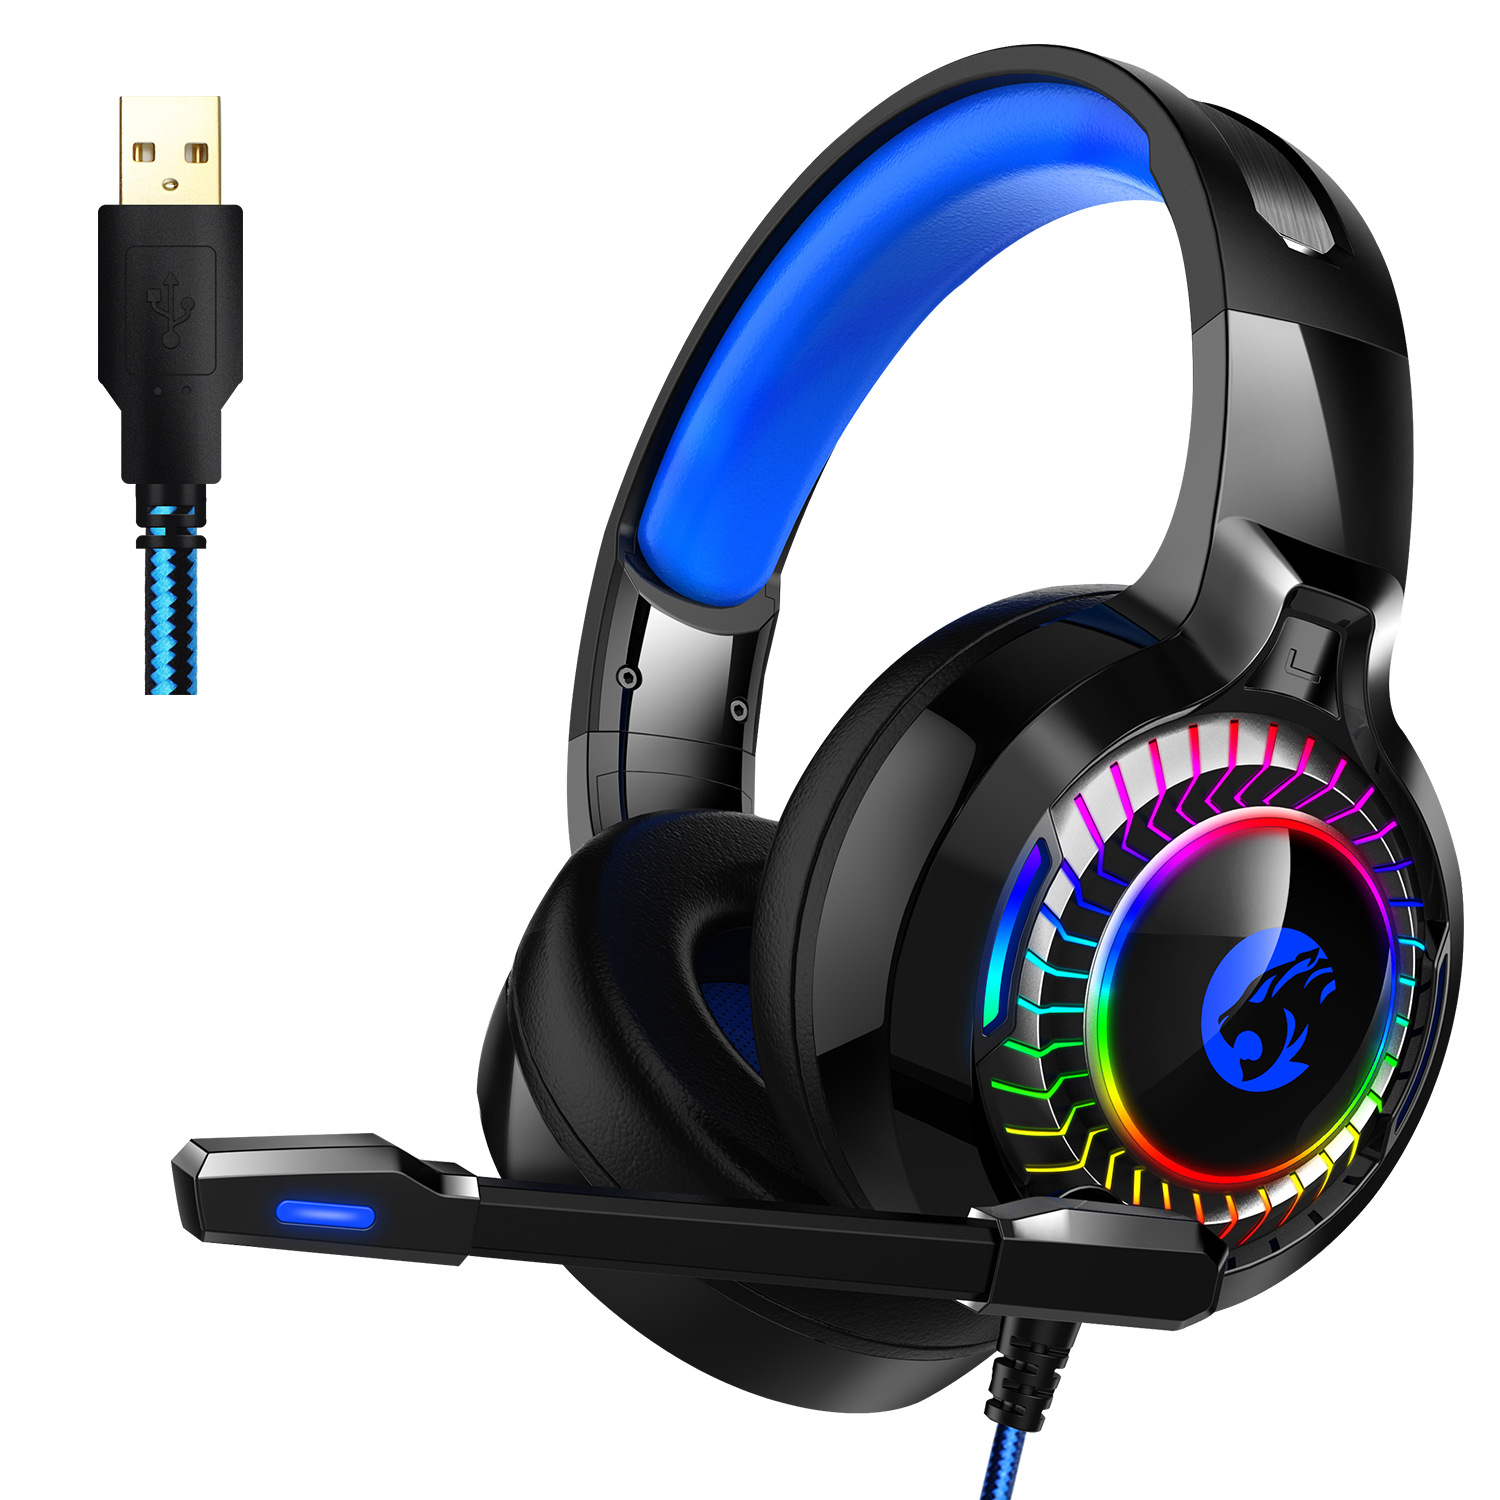 A60 Gaming Headset Surround Stereo Gaming Headphones with Mic LED Lights Works for PS4 Xbox  7.1 channel